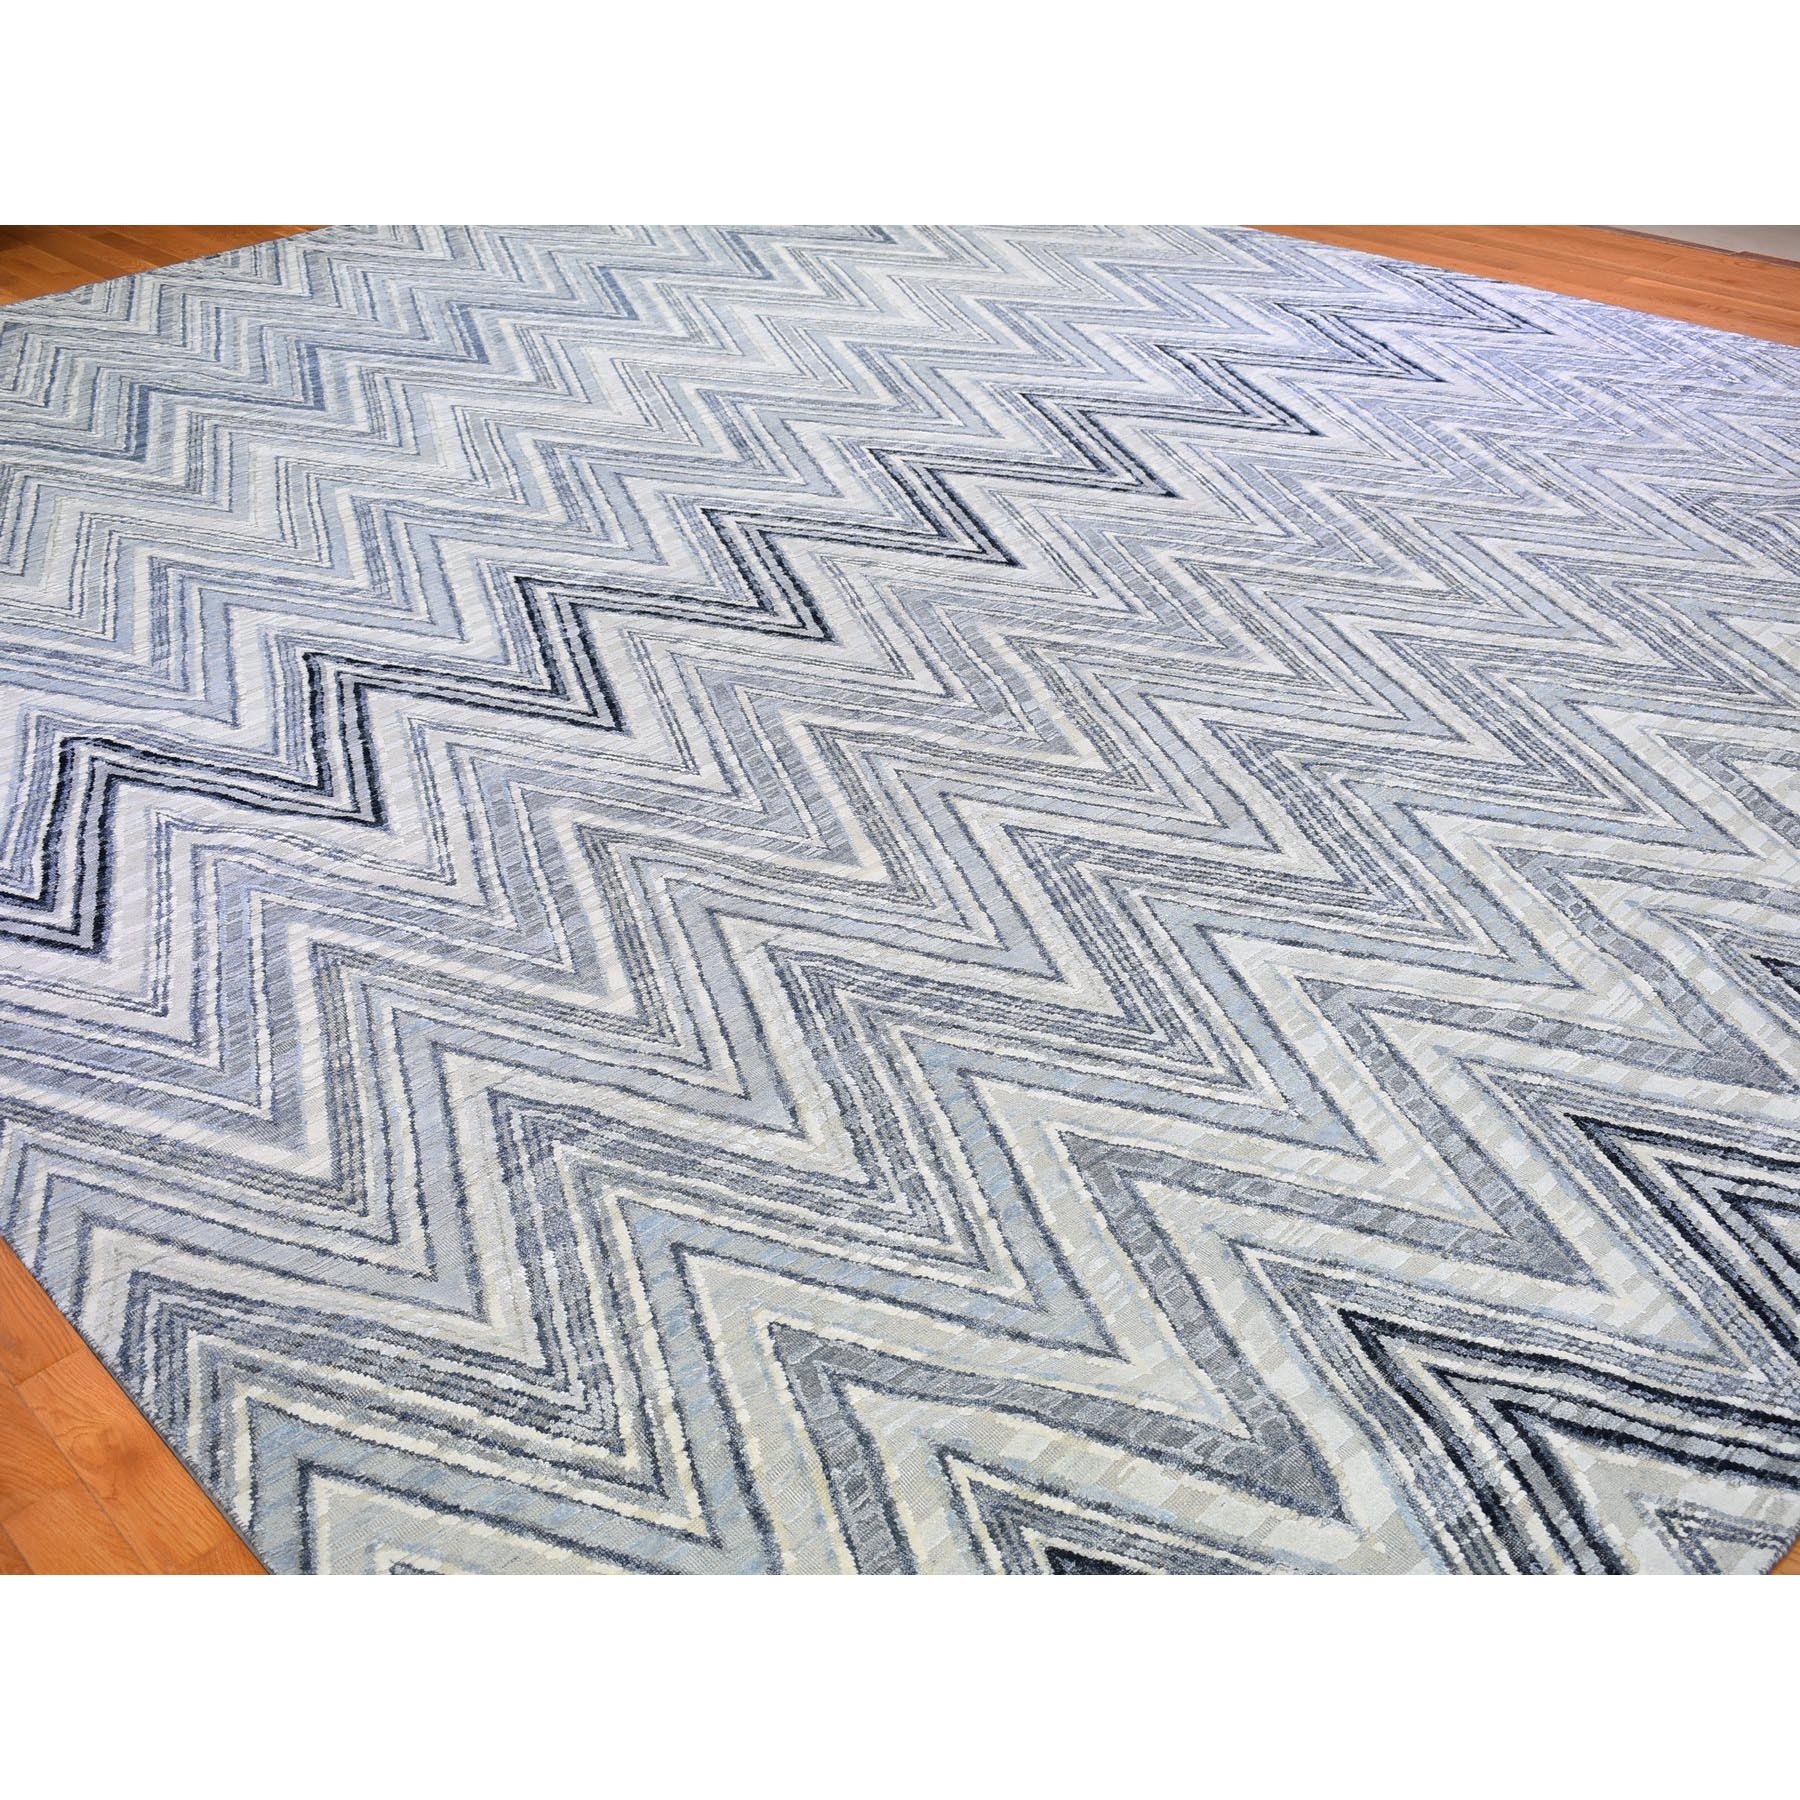 14'1"x18'1" Oversized Gray-Blue Chevron Design Textured Wool and Pure Silk Hand Woven Oriental Rug 